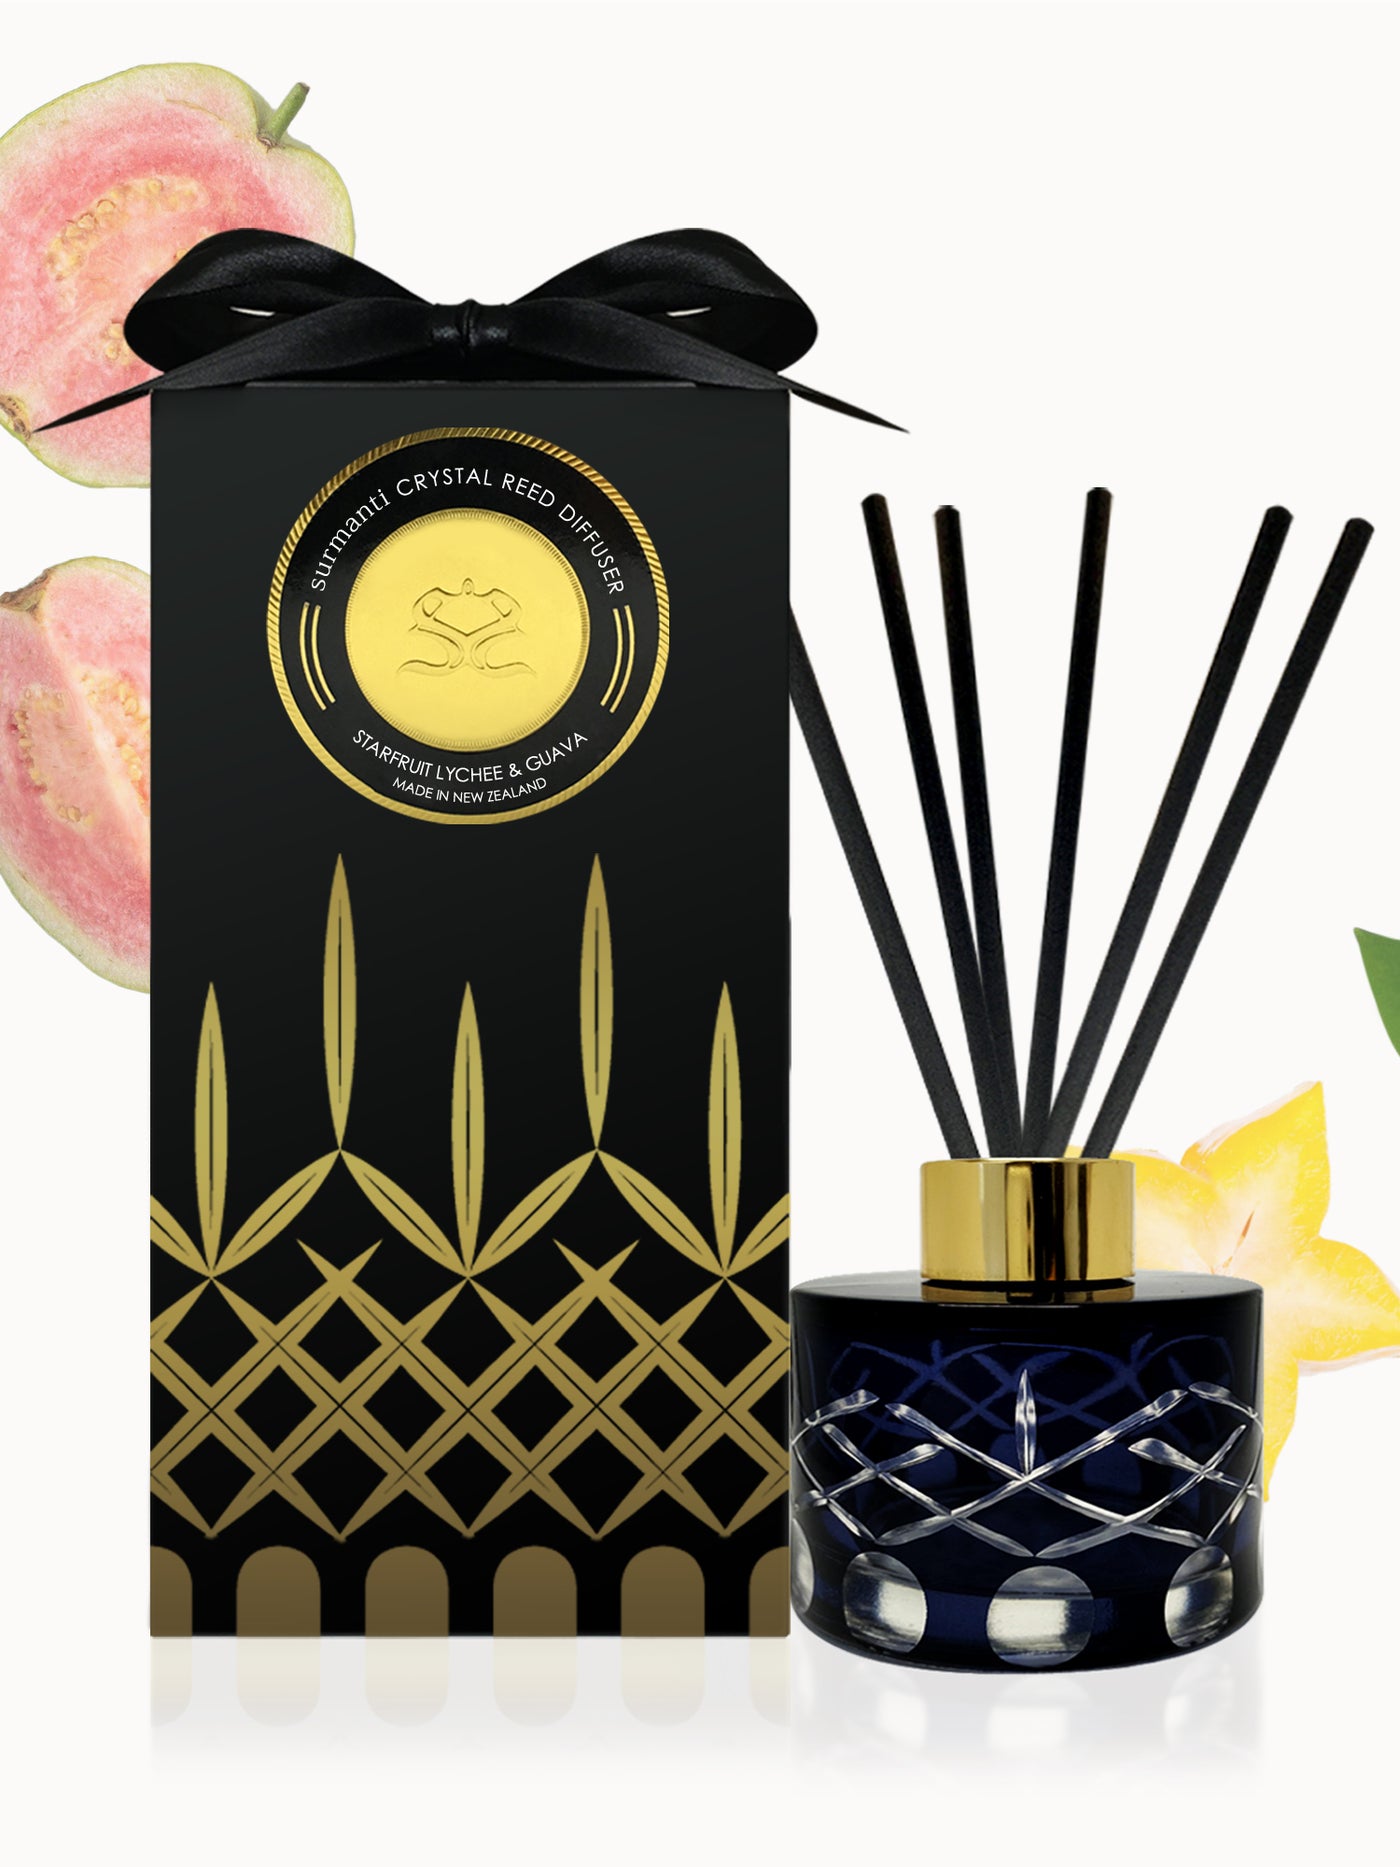 Starfruit Lychee & Guava Crystal Reed Diffuser - Large Rooms 200ml